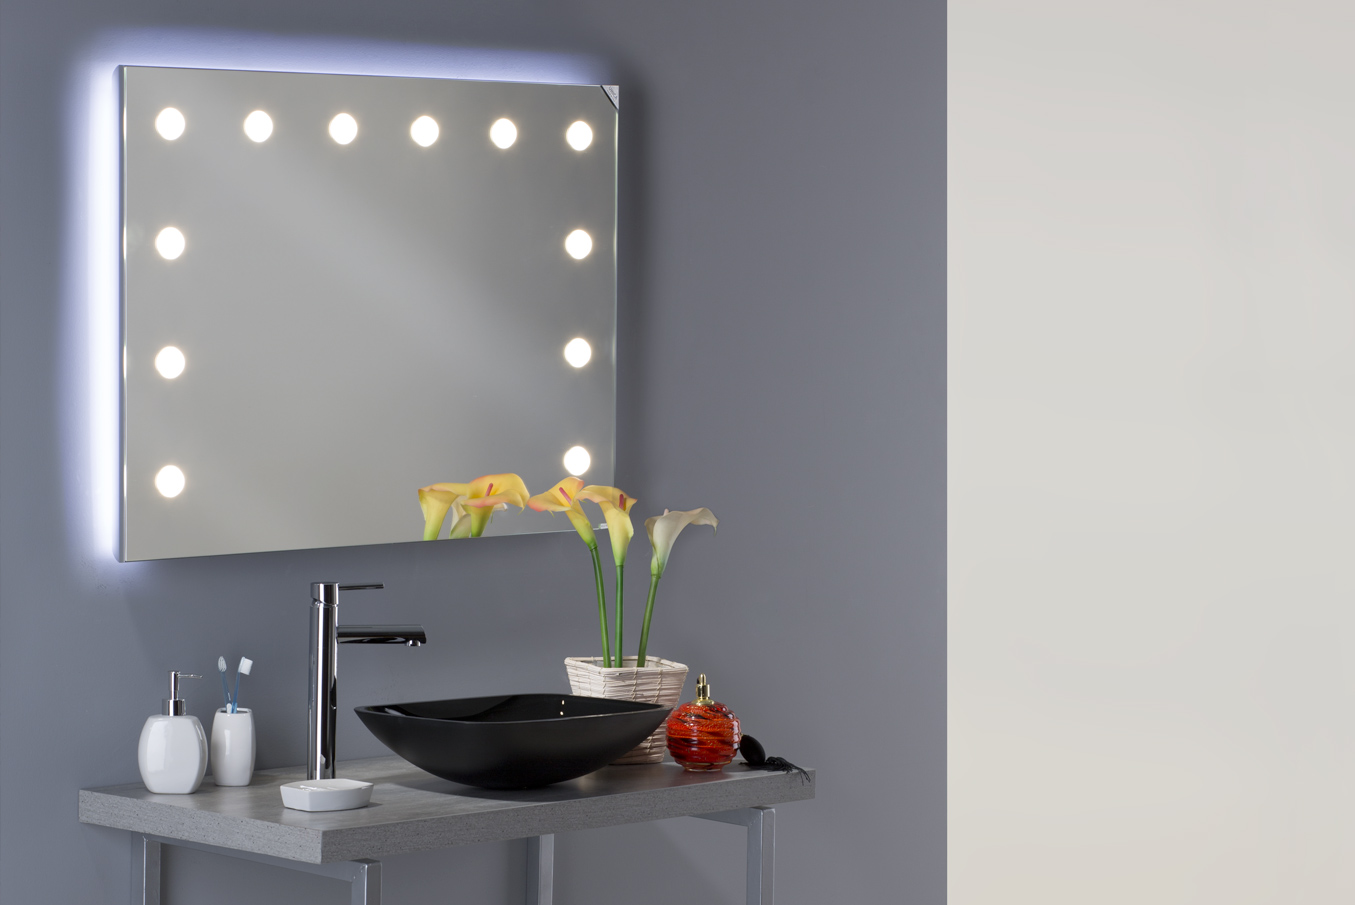 Bathroom mirror with lights (white backlight)